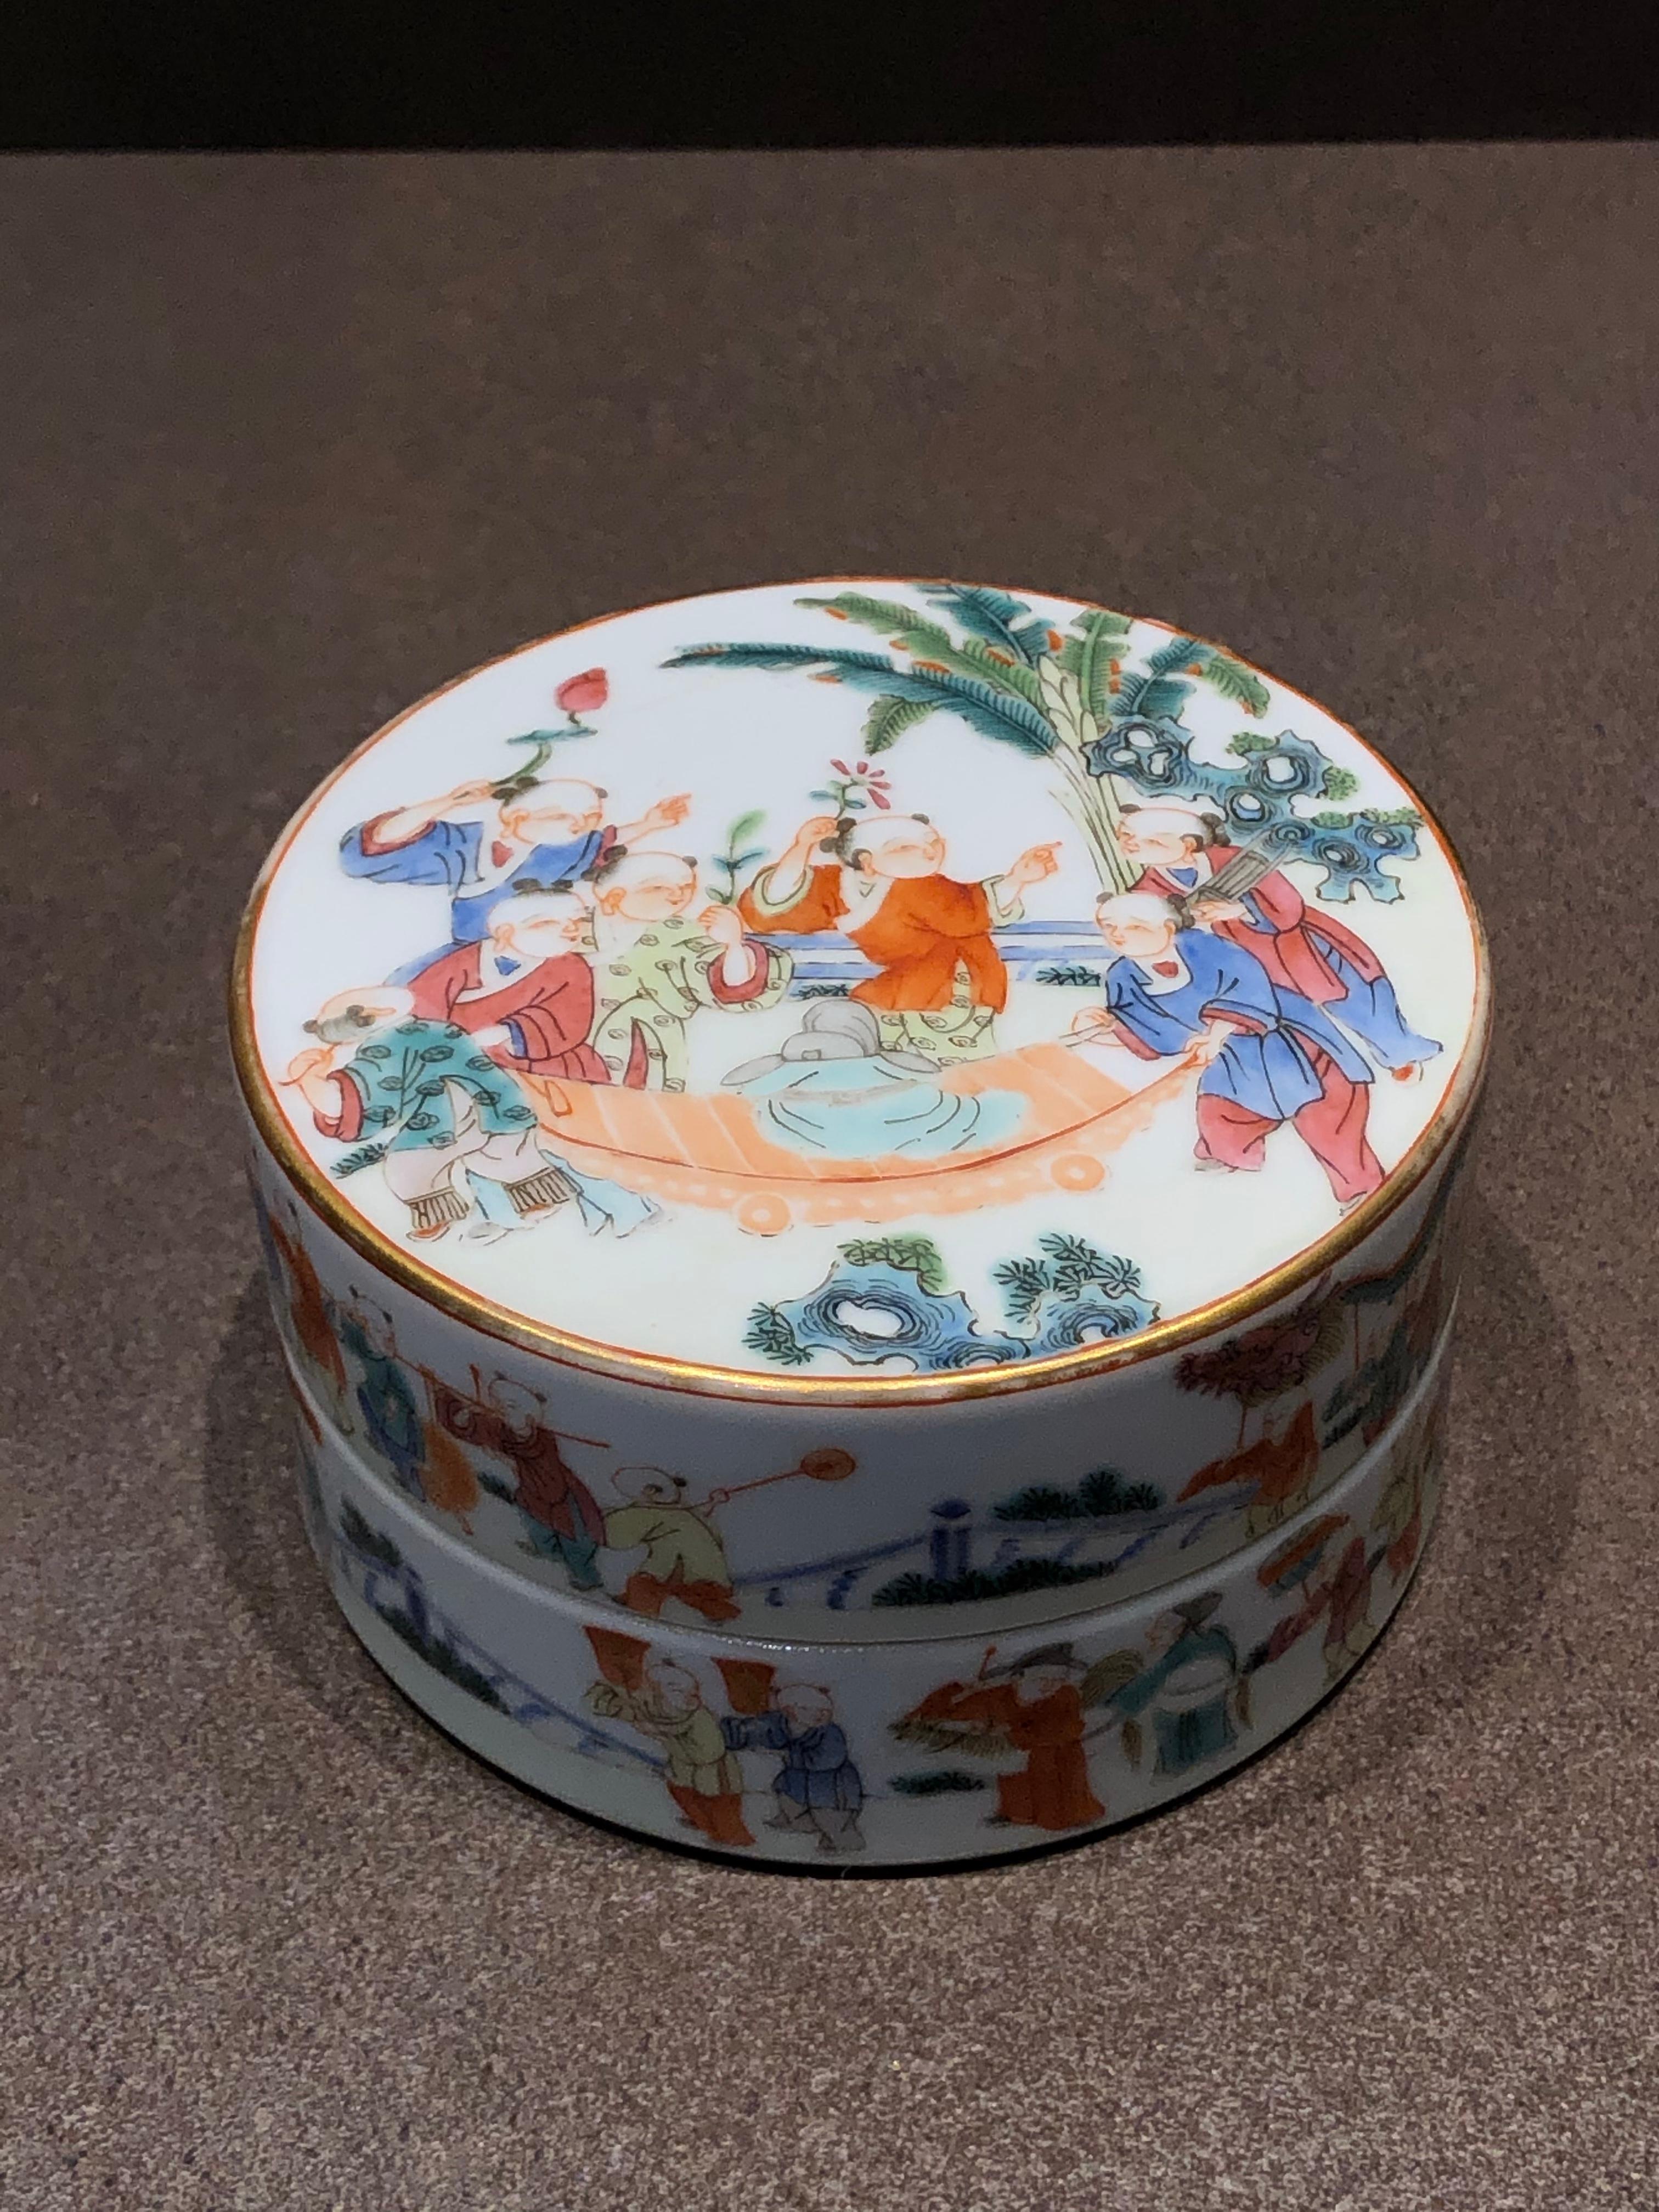 This round lidded container was made in the late Qing Dynasty.
It is thought to have been used as a container for incense or red ink at the time.

It is decorated with a lovely design of playing Chinese children using the technique of powder